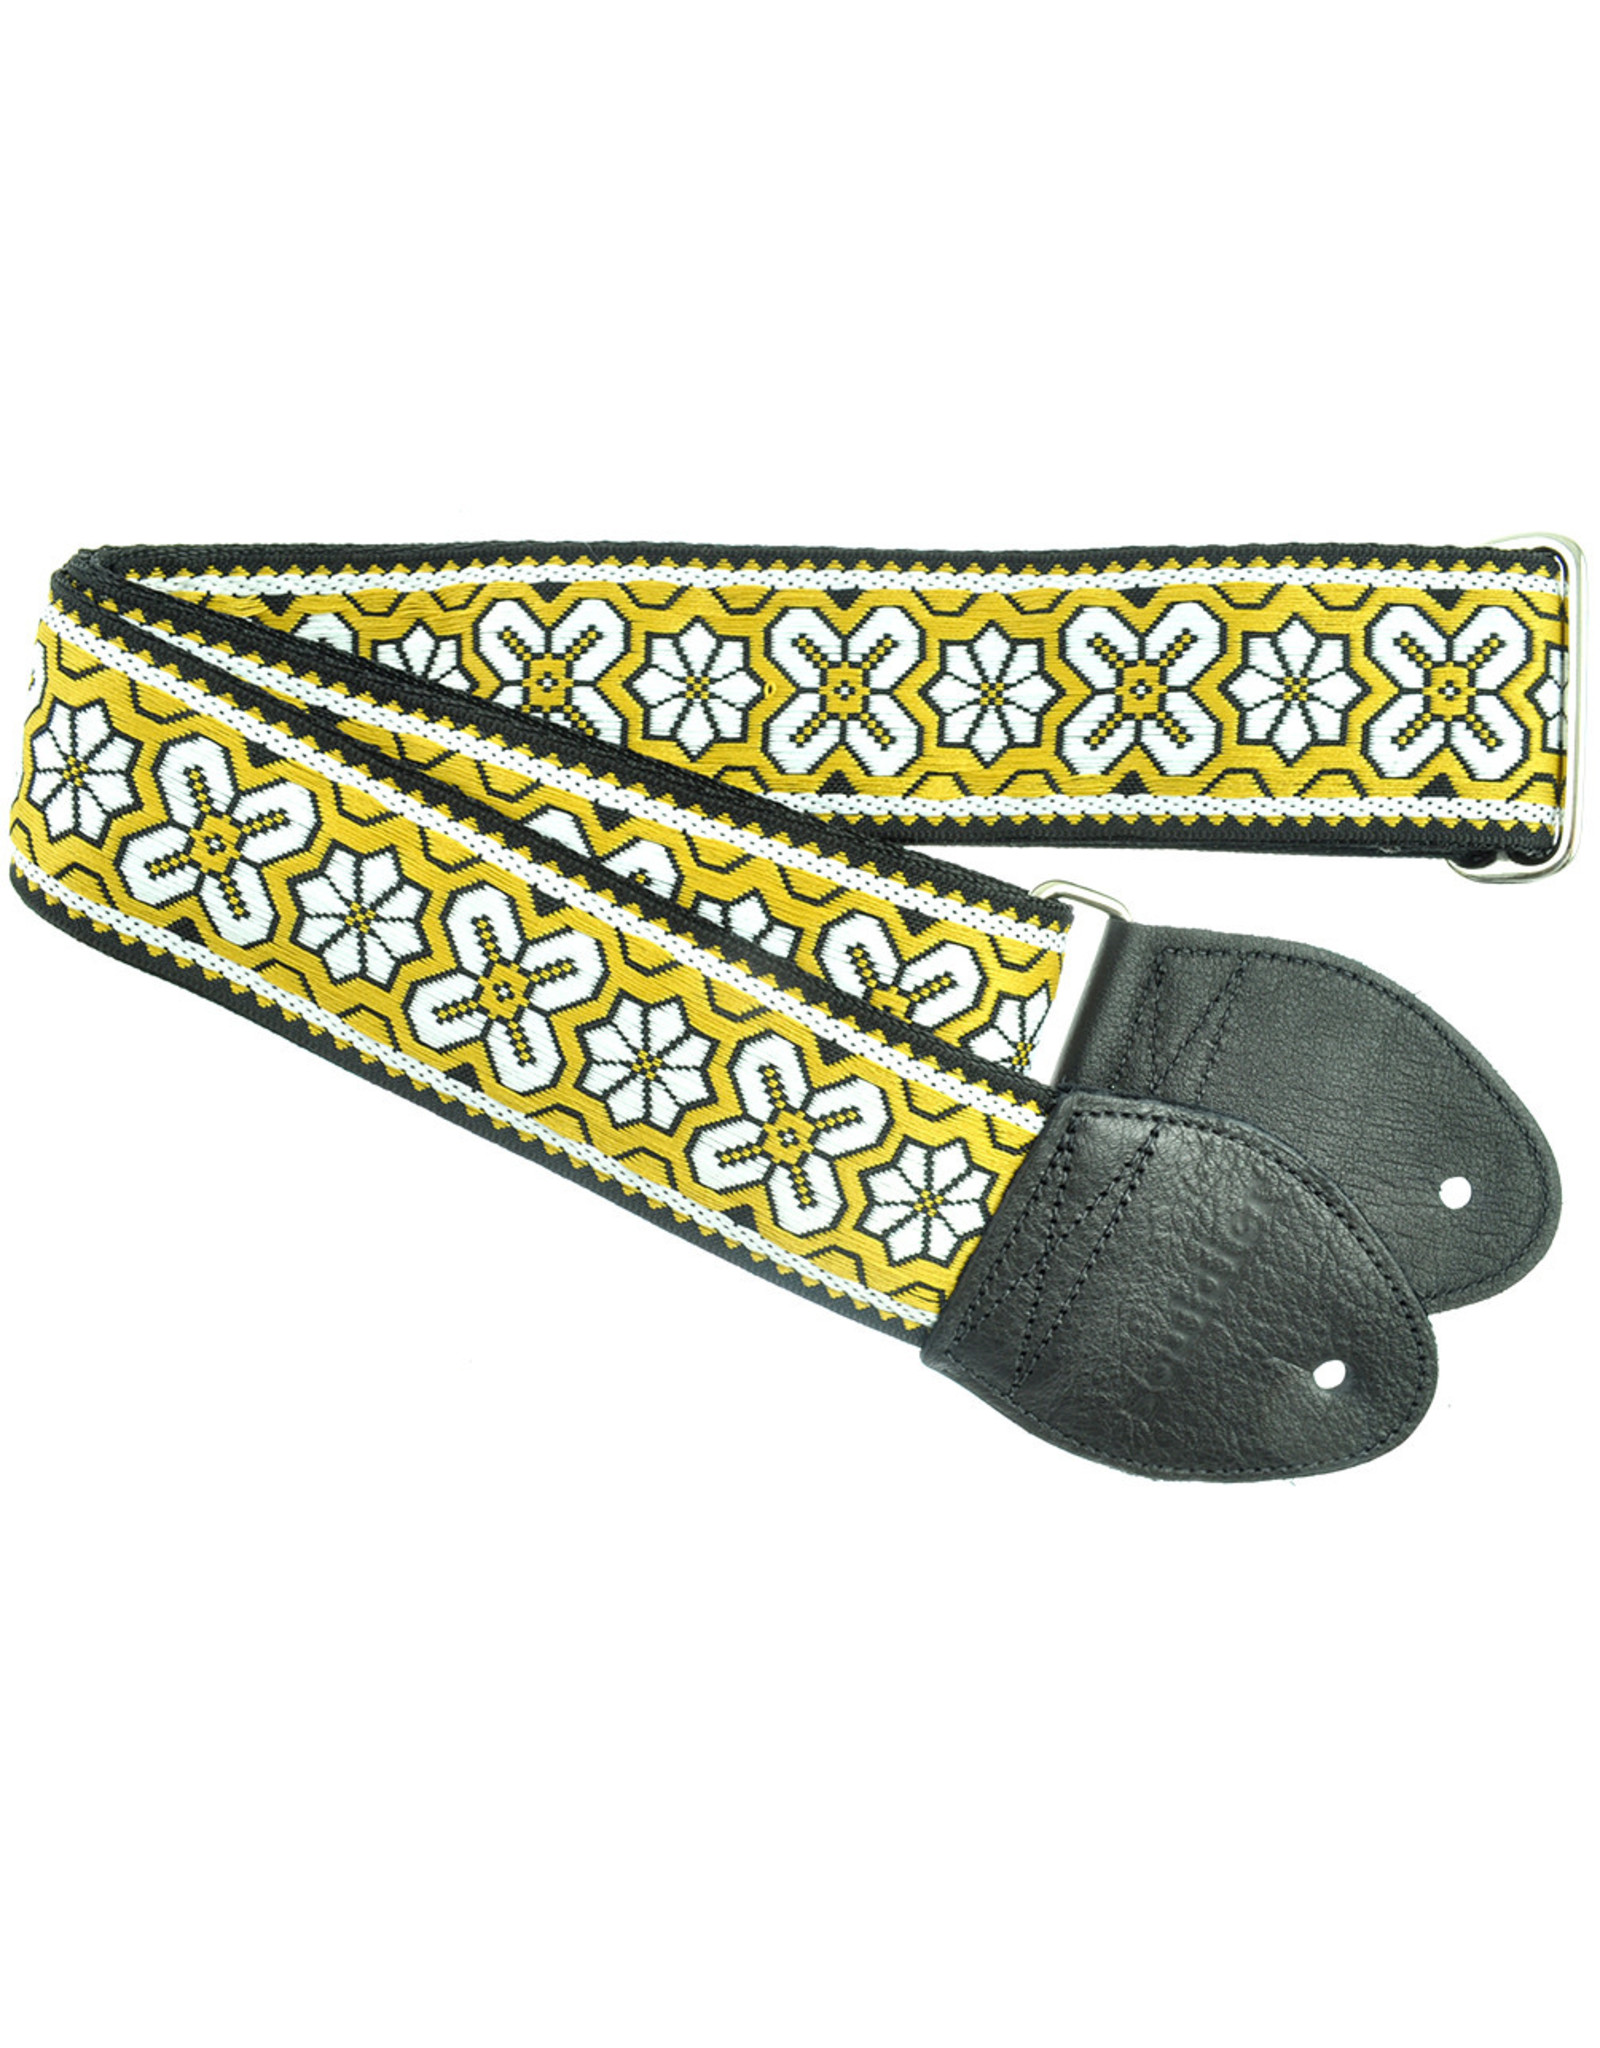 Souldier Souldier Greenwich - Yellow Classic Guitar Strap